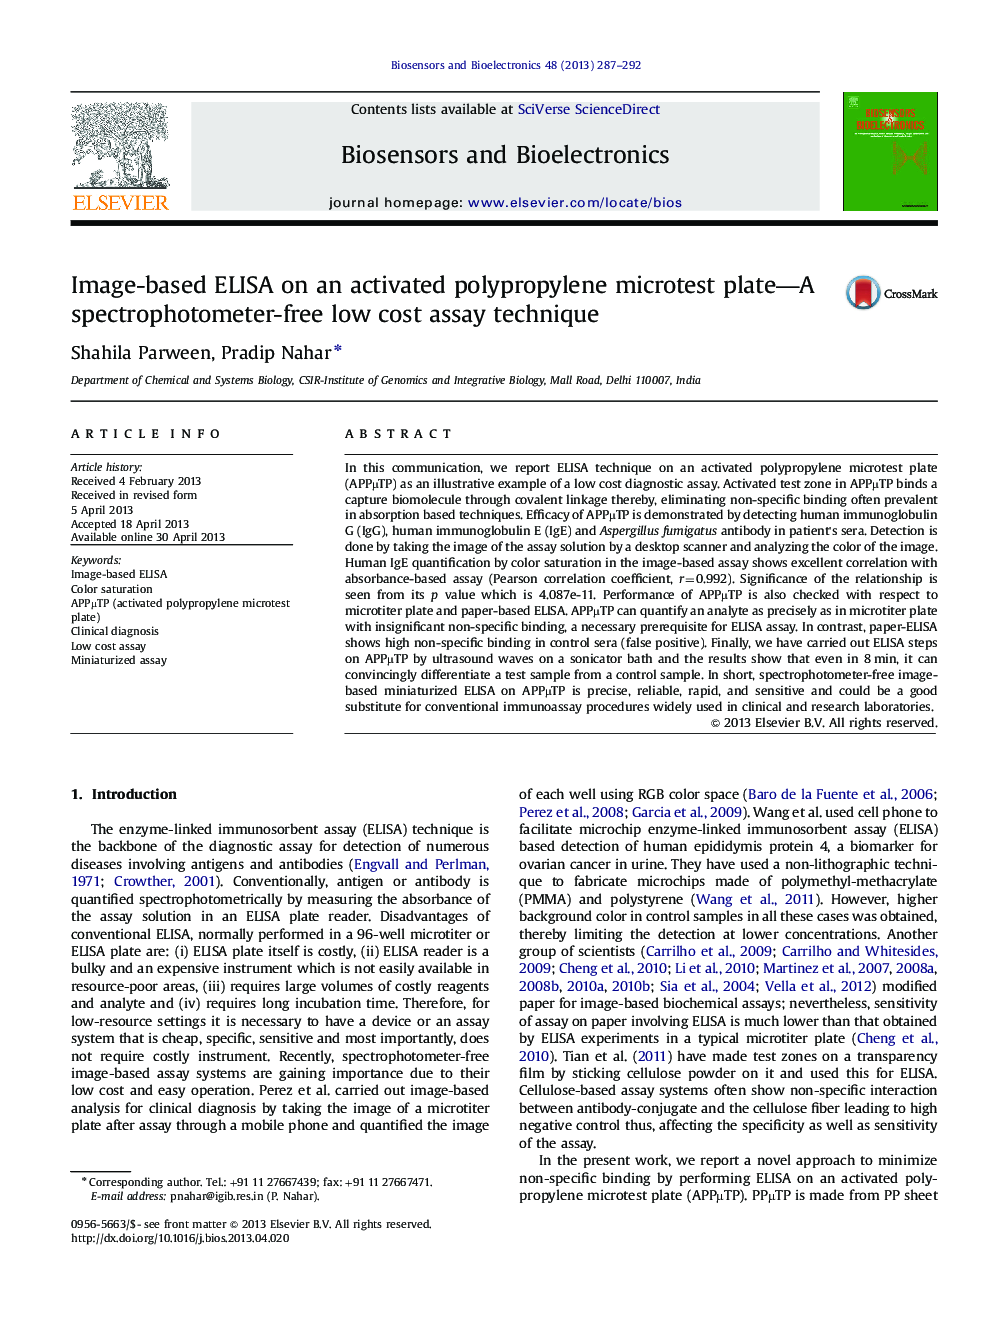 Image-based ELISA on an activated polypropylene microtest plate-A spectrophotometer-free low cost assay technique